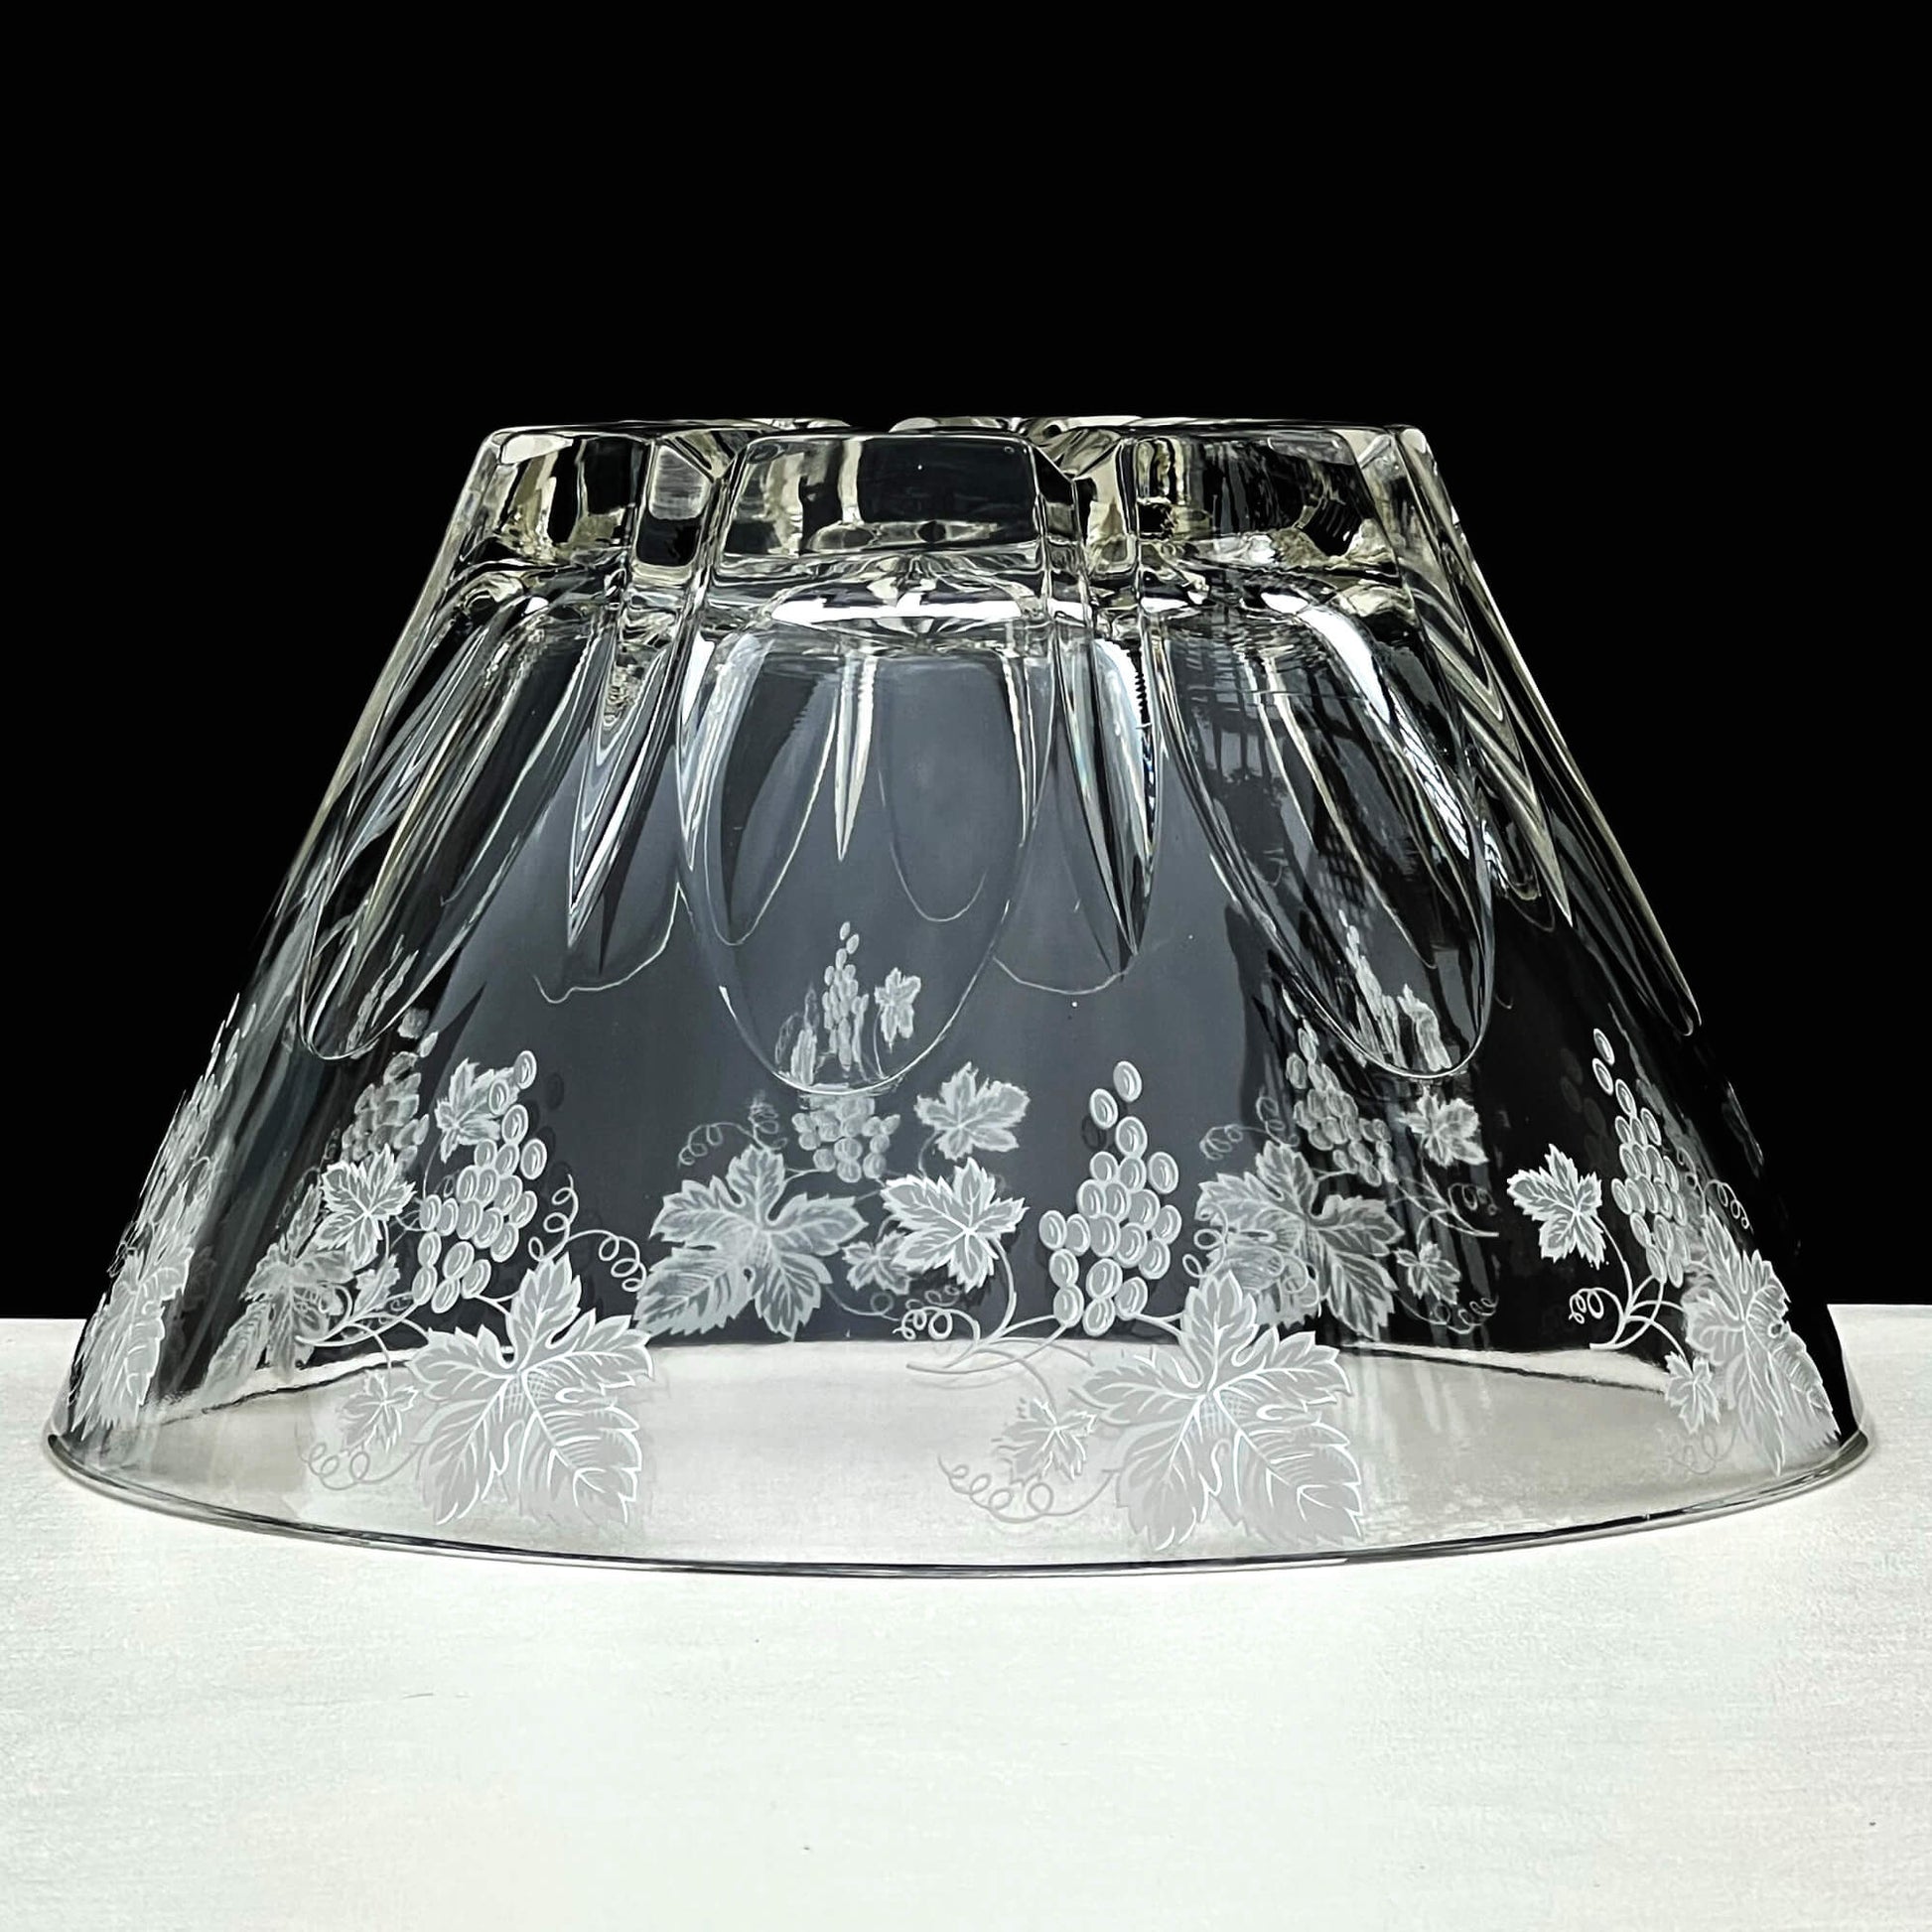 JAV6-decorative-lead-crystal-bowl, shown-upside-down., side view.